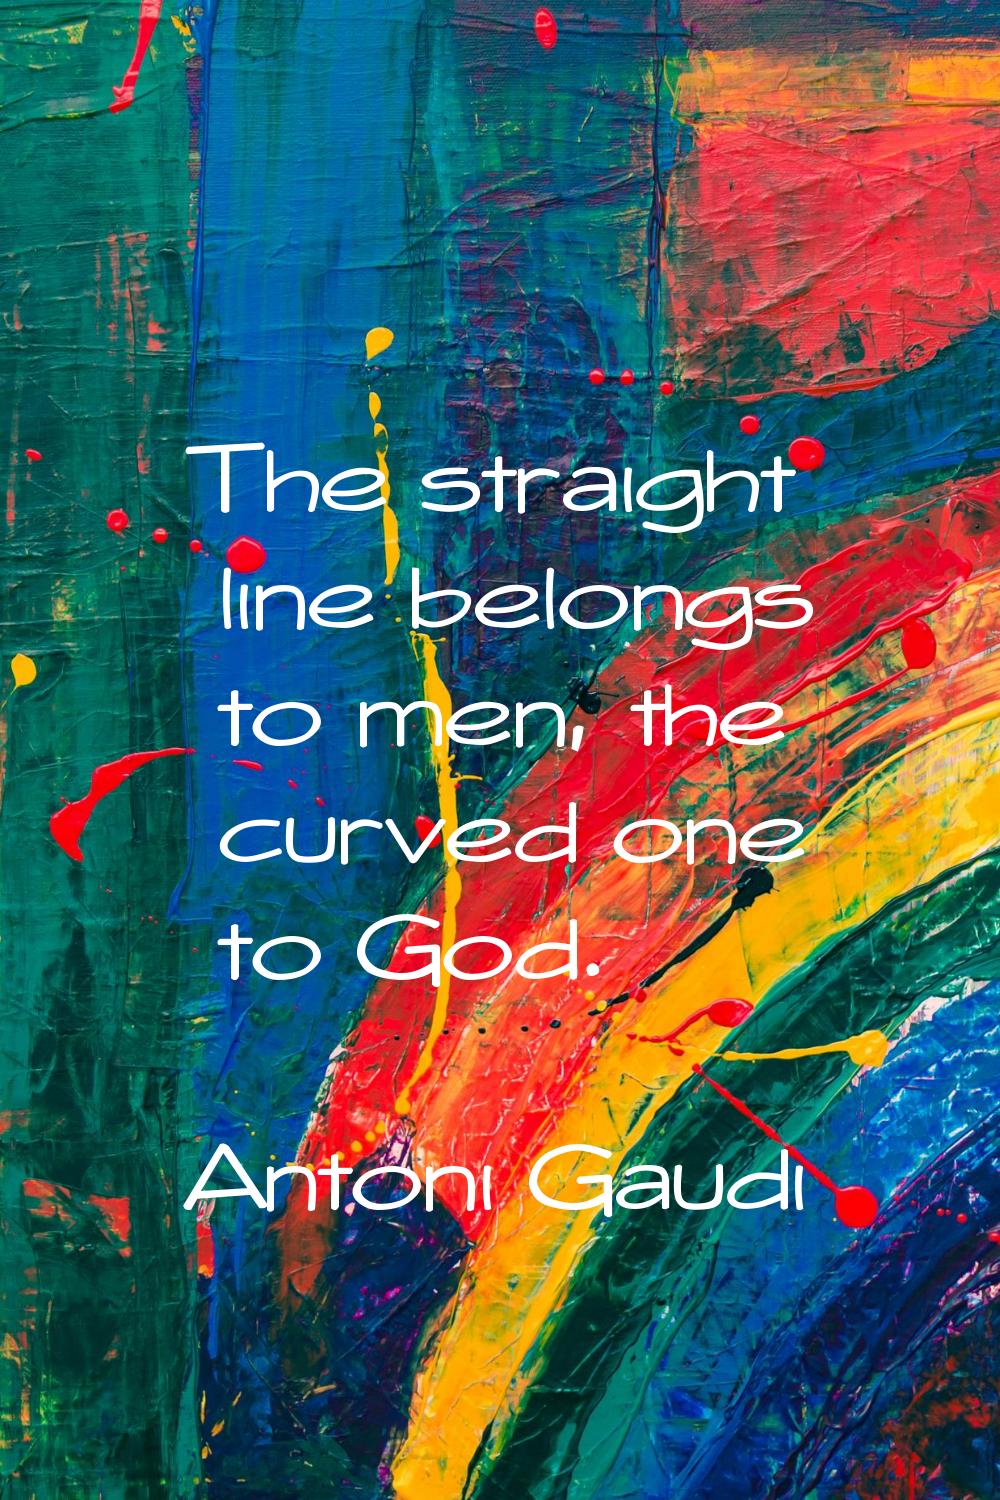 The straight line belongs to men, the curved one to God.